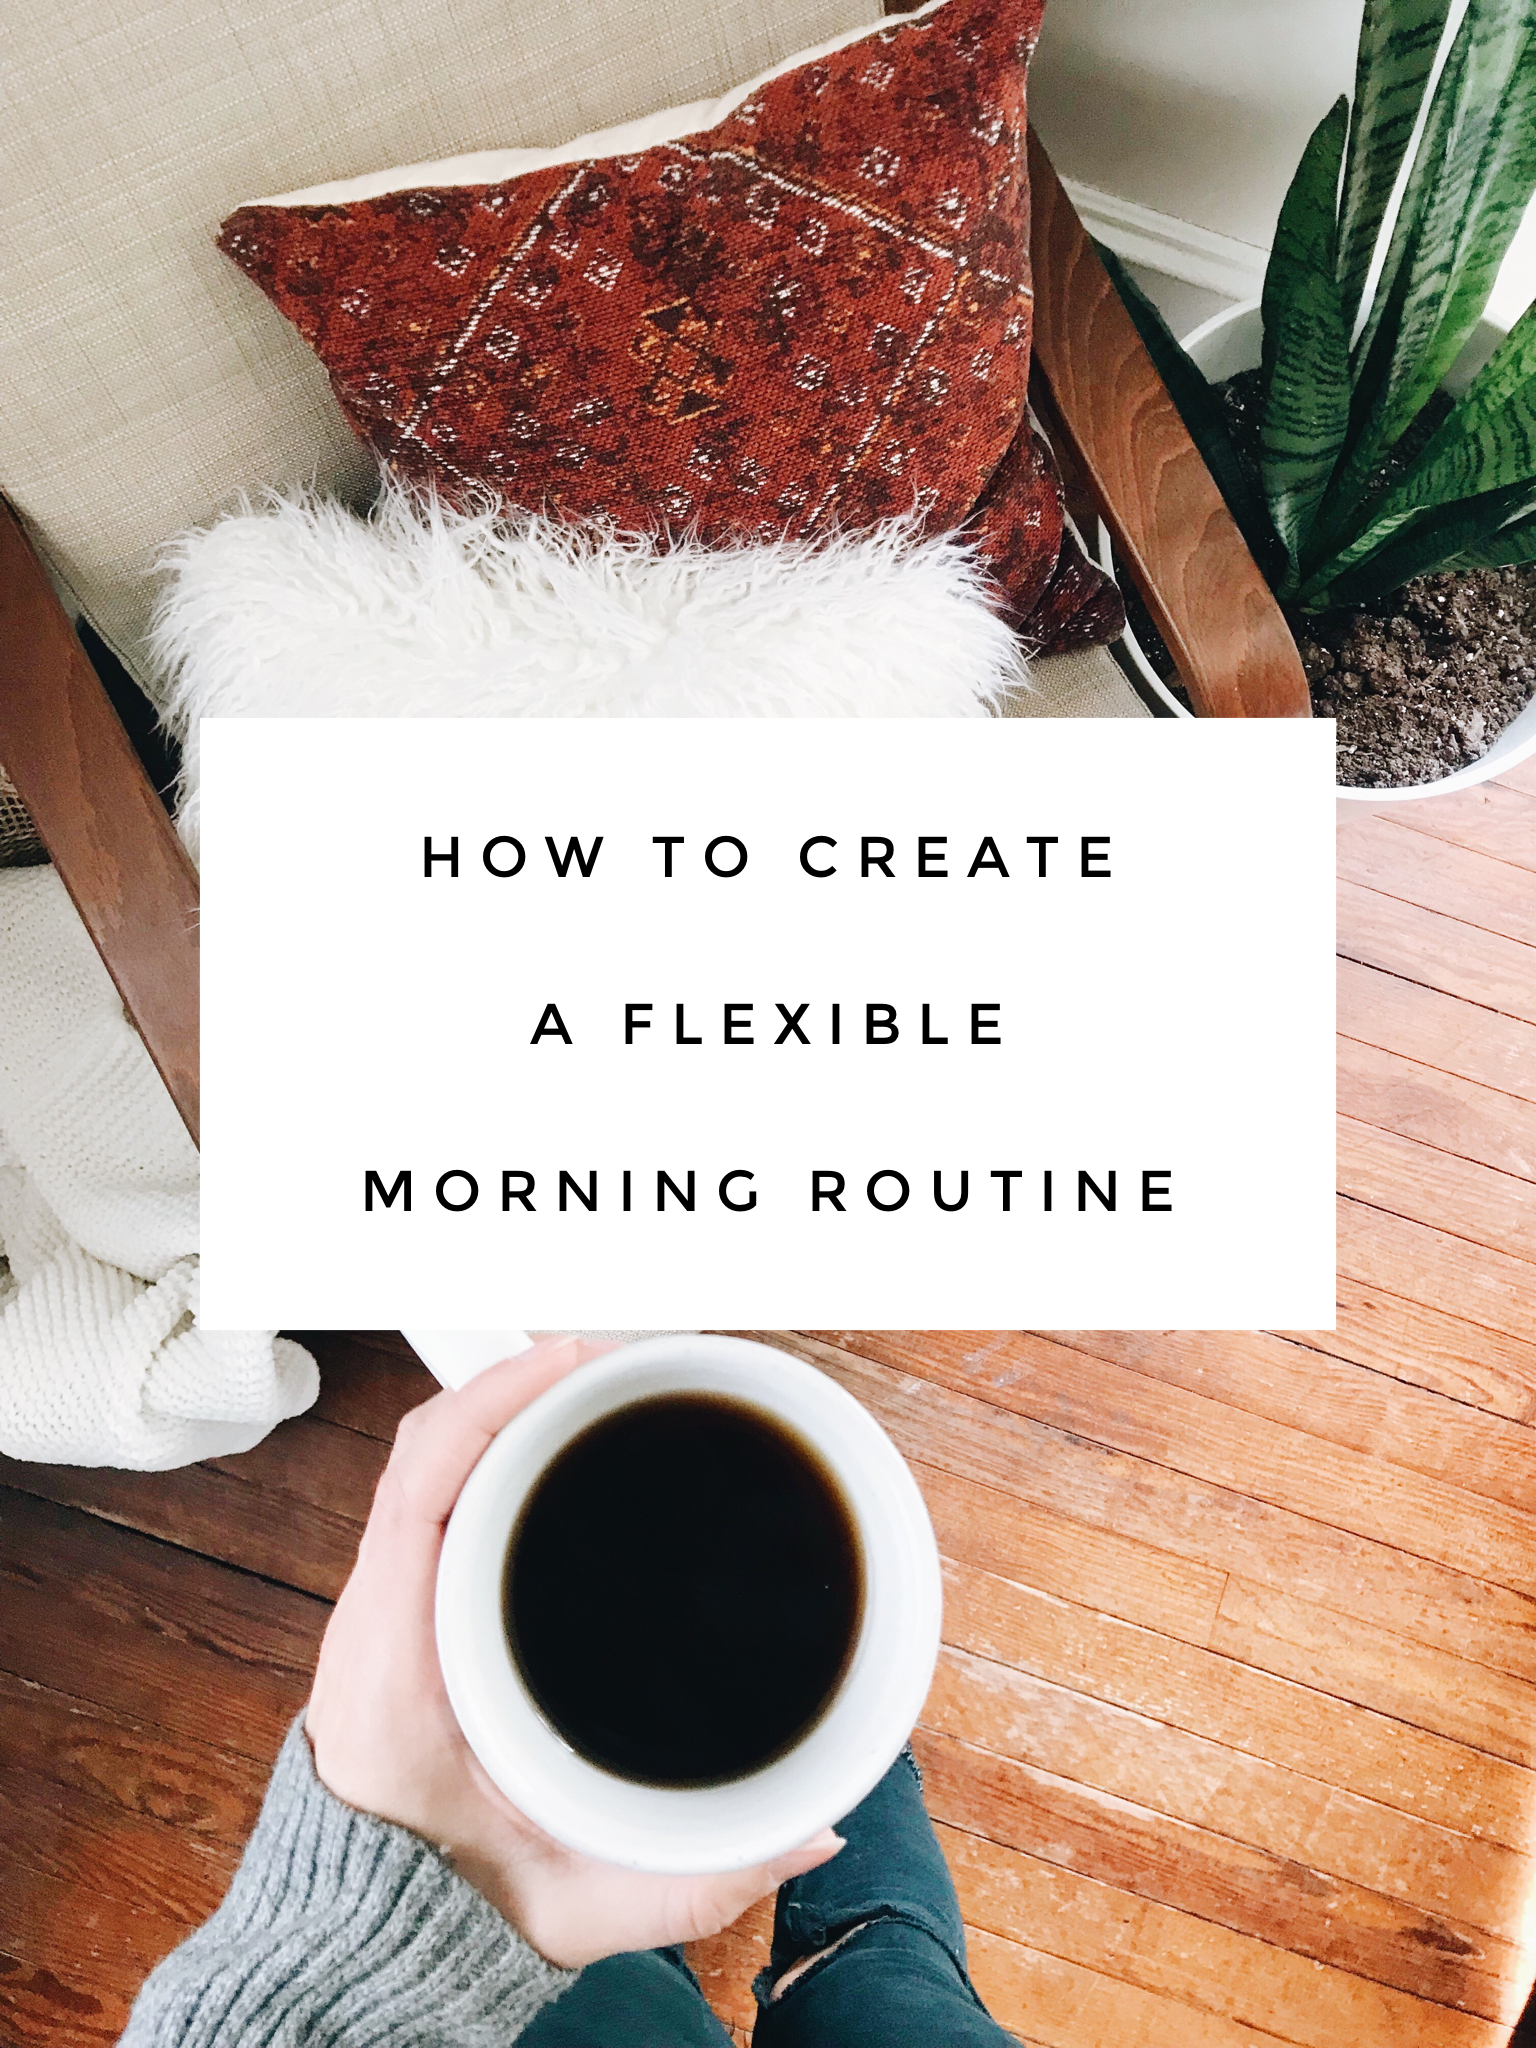 How to Create a Flexible Morning Routine